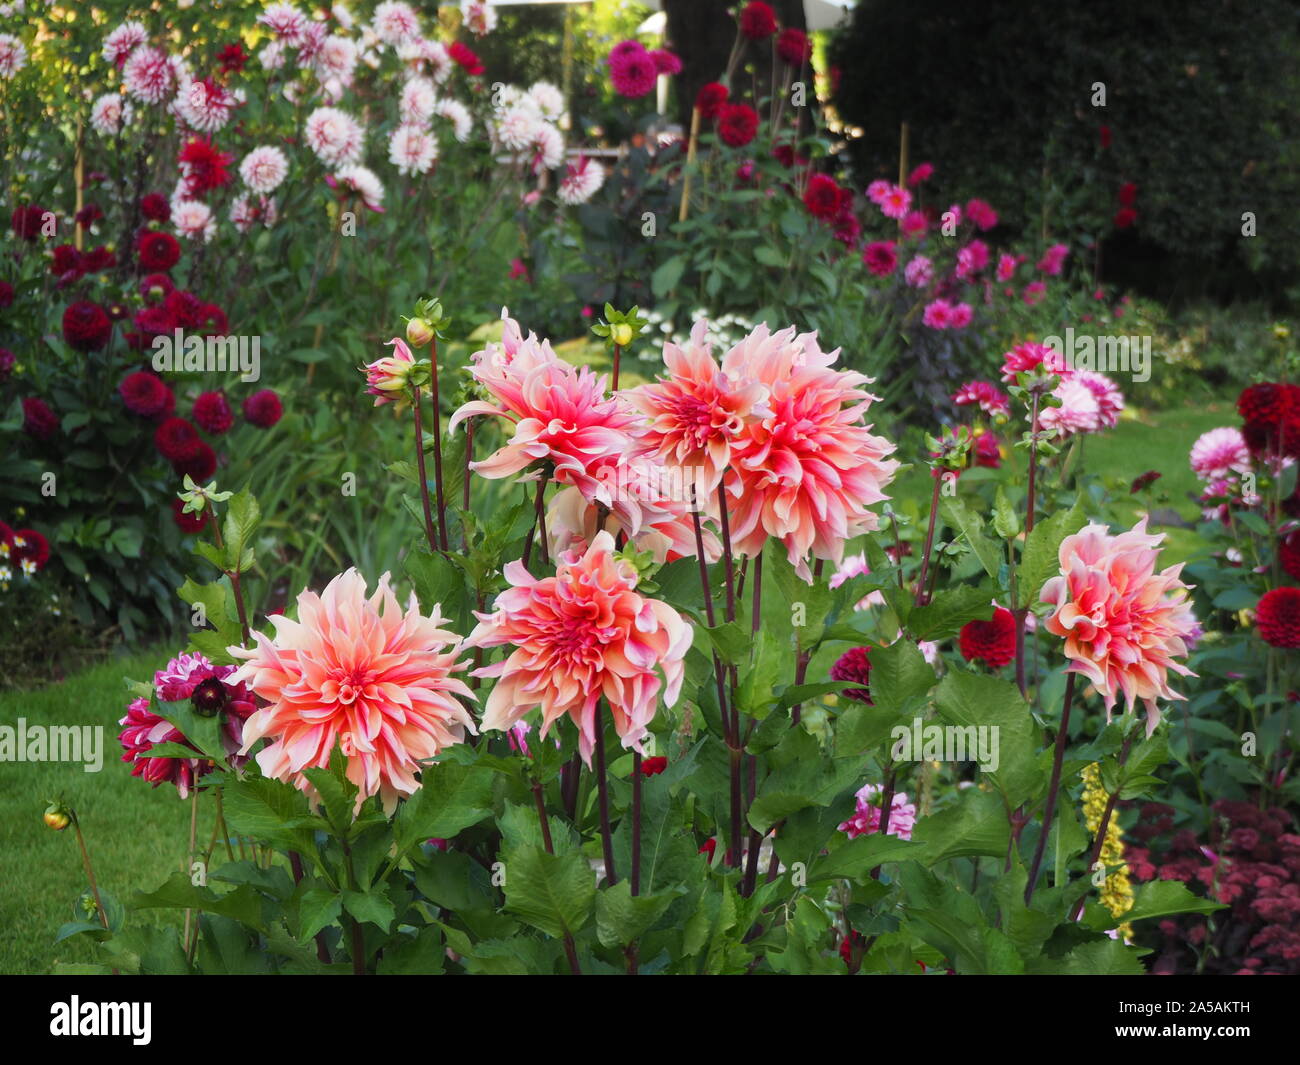 Dahlia variety Laybyrinth among the terraced plant borders at Chenies Manor Sunken garden, also Dahlias Fascination, Rebecca's World and Karma Choc. Stock Photo